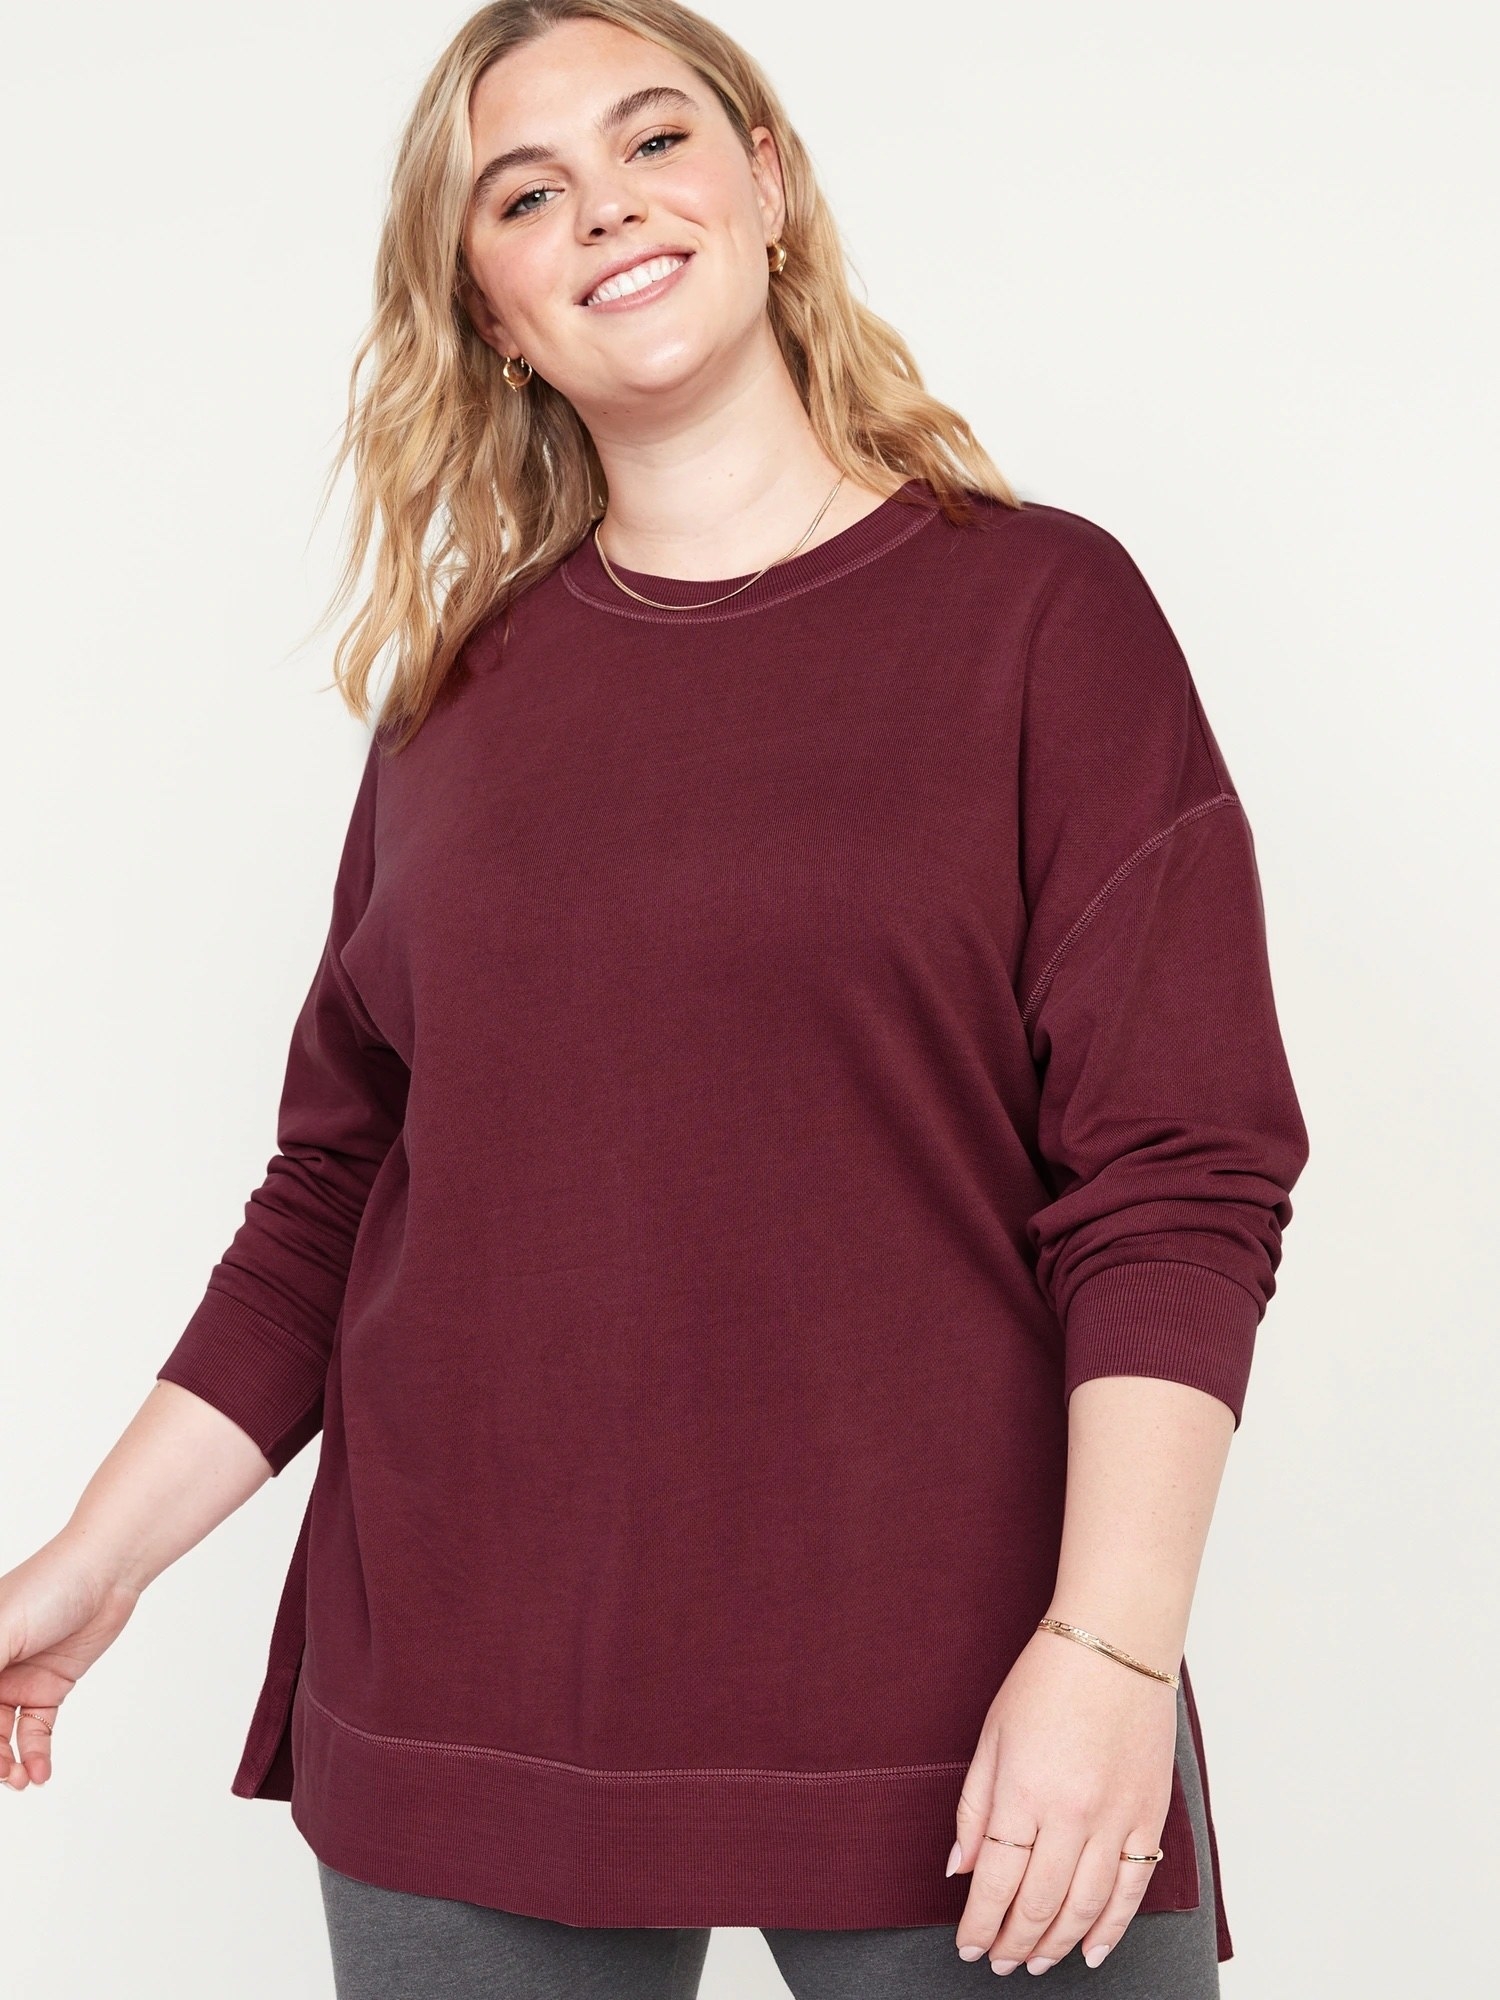 A person wearing the sweater over a pair of leggings in front of a plain background